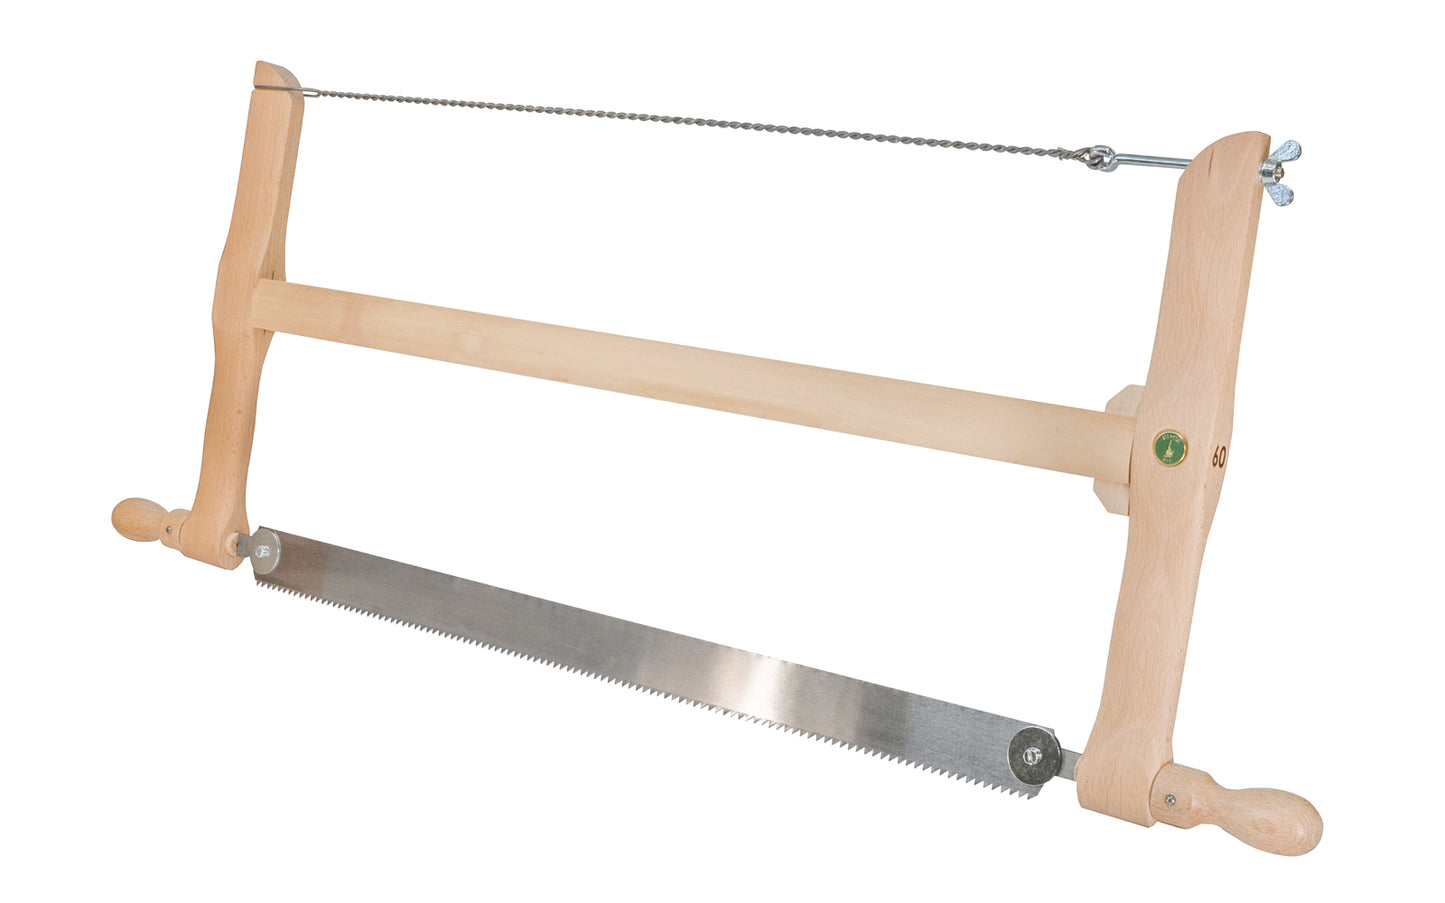 Made in Germany · Model No. 270-600 ~ Frame saw "Buck Saw" made by Ulmia in Germany. Large push-to-cut teeth for coarser cuts. This web saw is suited for cutting to size & cross cutting of sawn timber. Handle frame is made of wood - 4044637101958 - 6 TPI - 600 mm blade - Made of Swedish steel - Set & sharpened - Coarse, Fast Cutting Blade - Web Saw